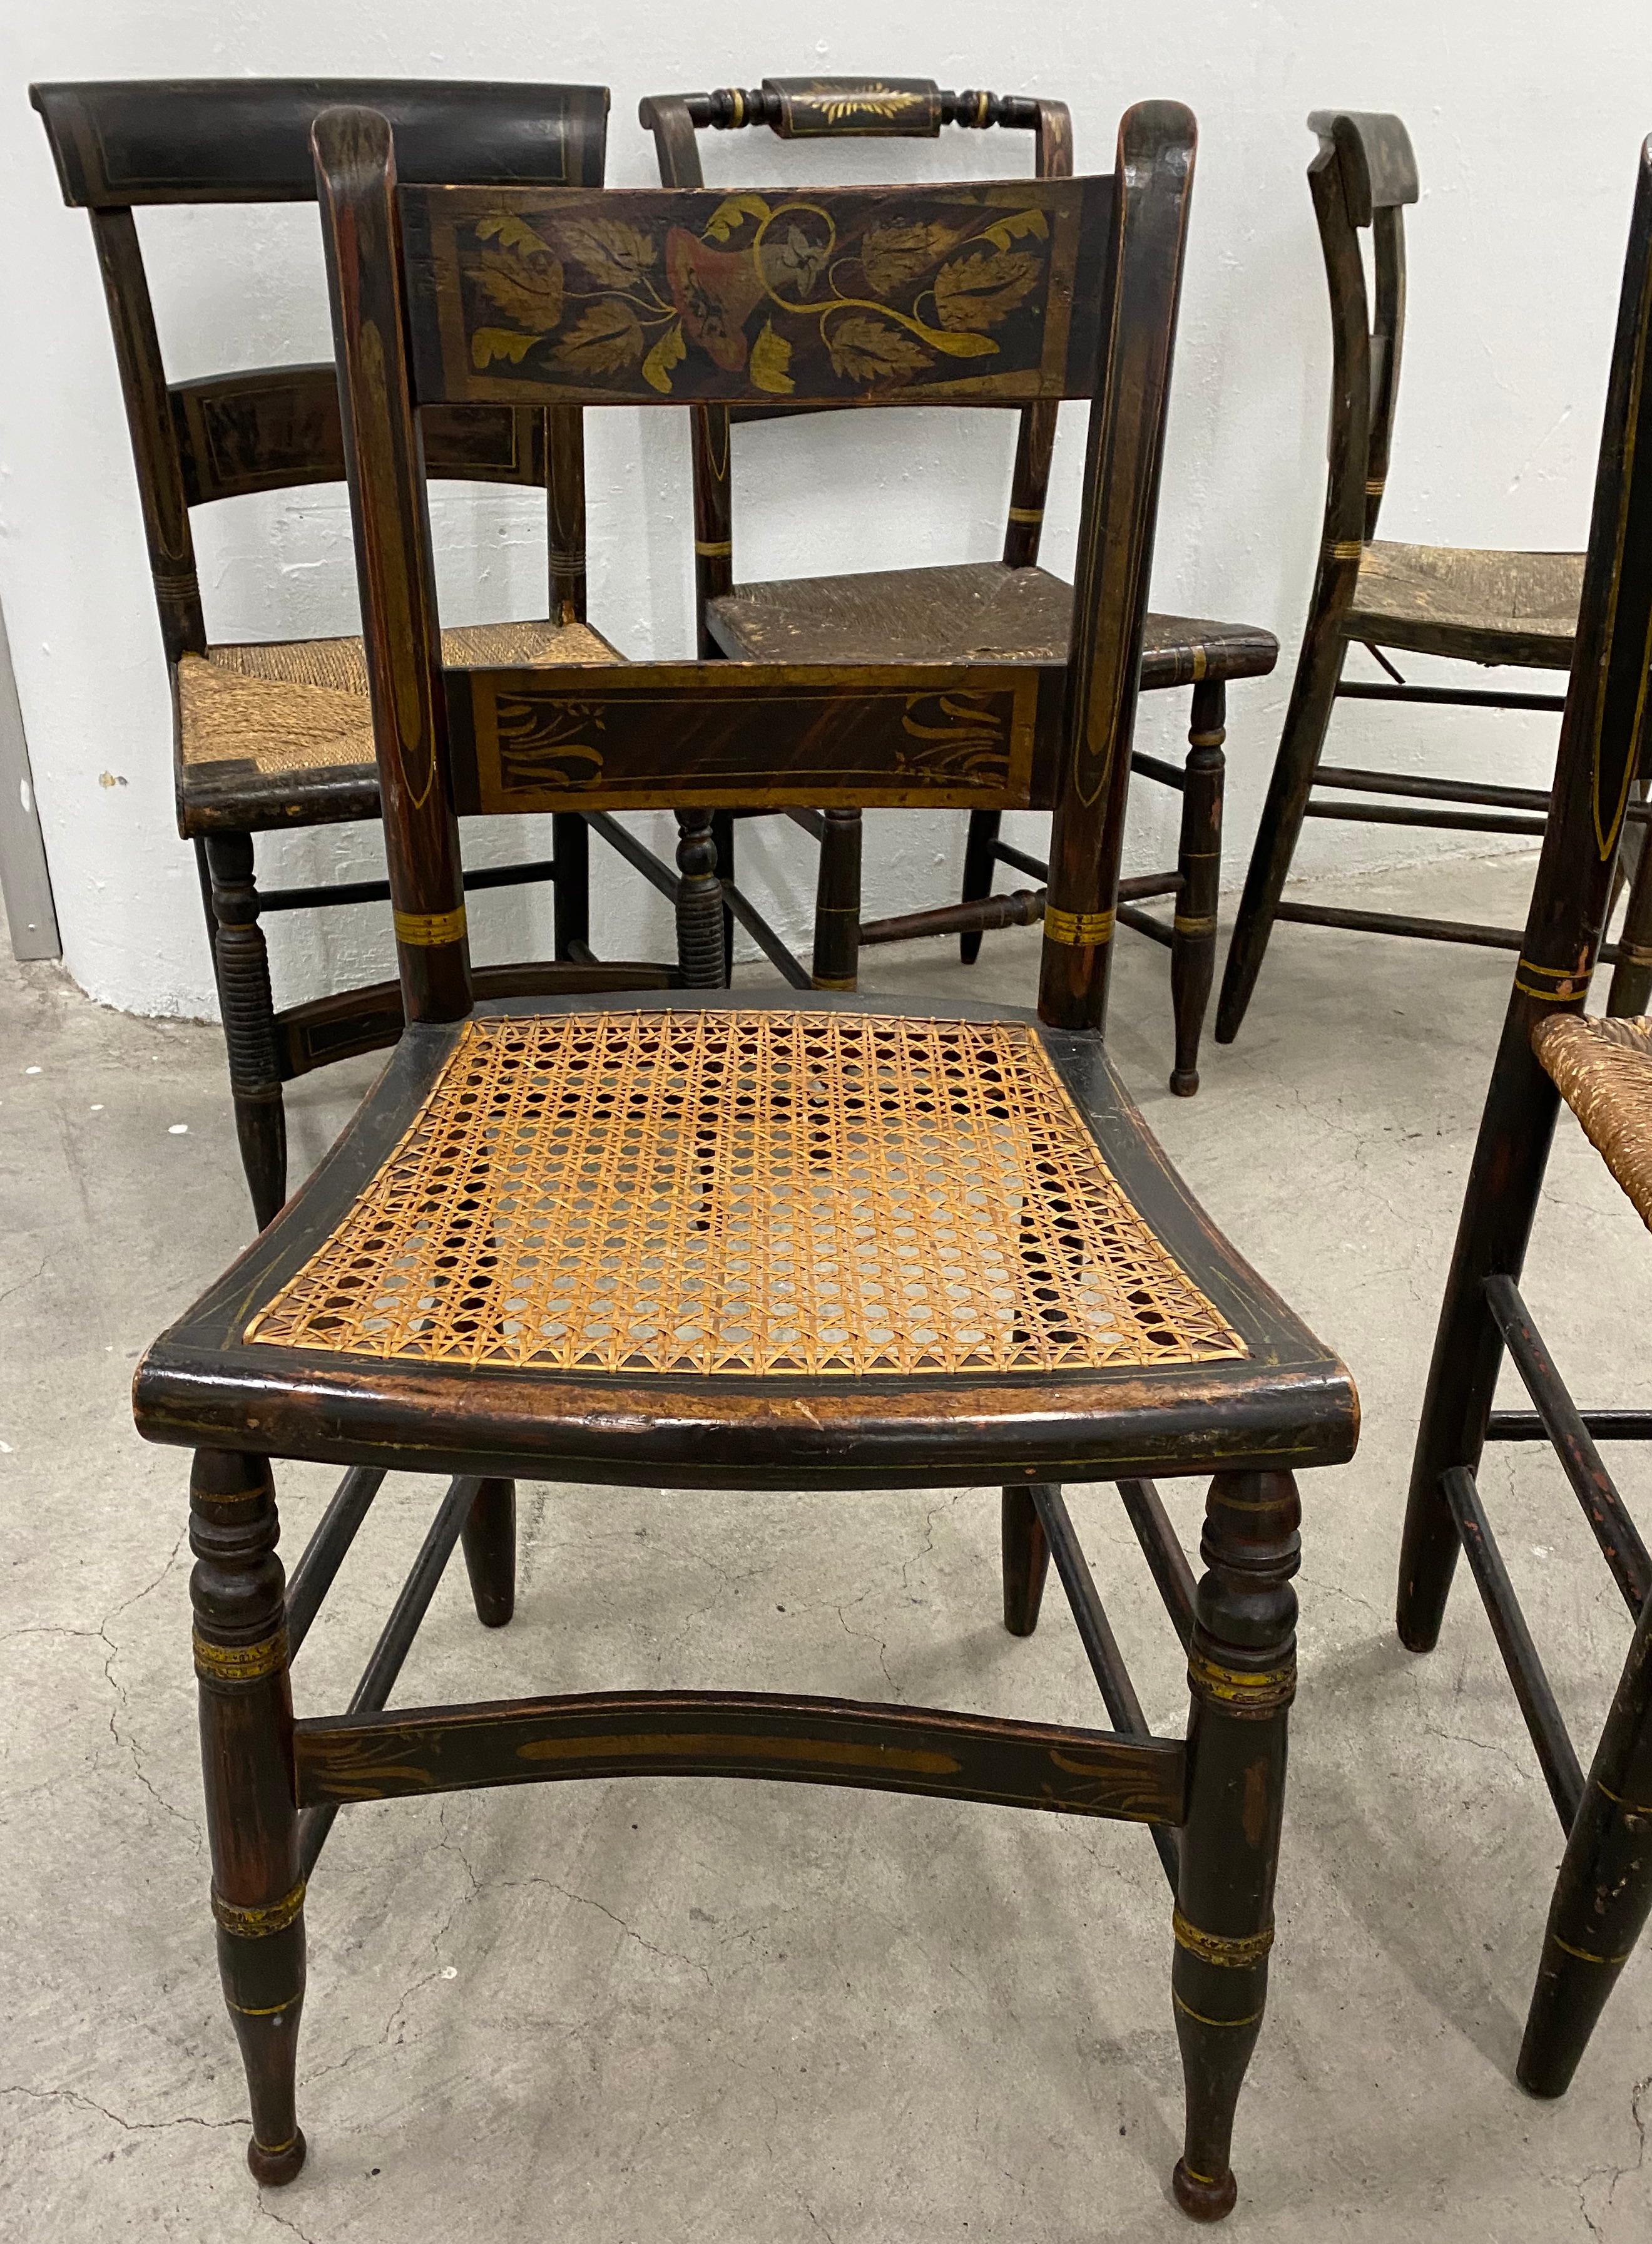 Lot of Six Mid-19th Century Mis-Matched American Hitchcock Side Chairs 3